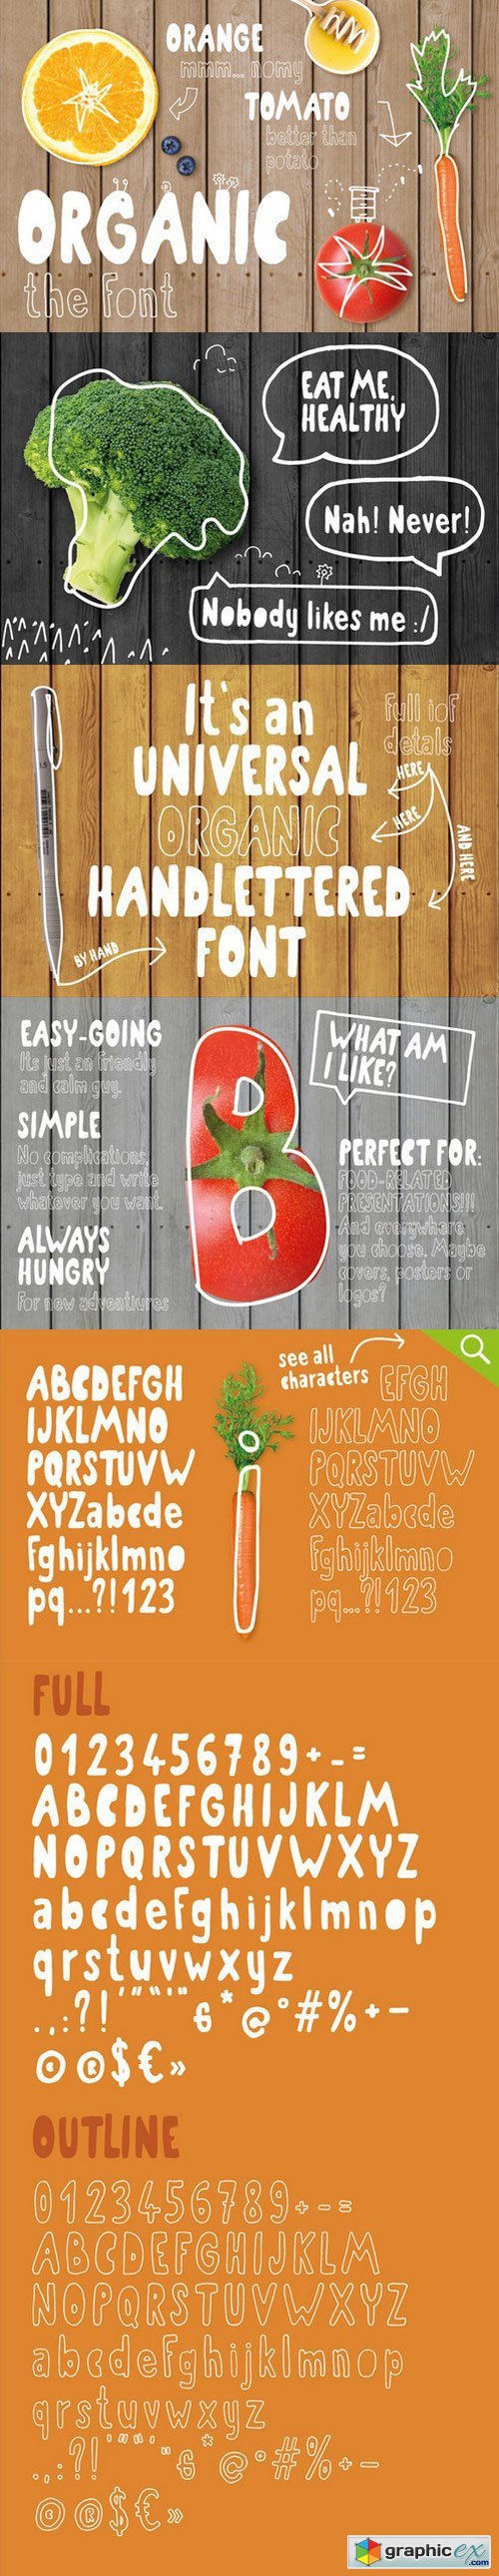 Organic the healthiest font family